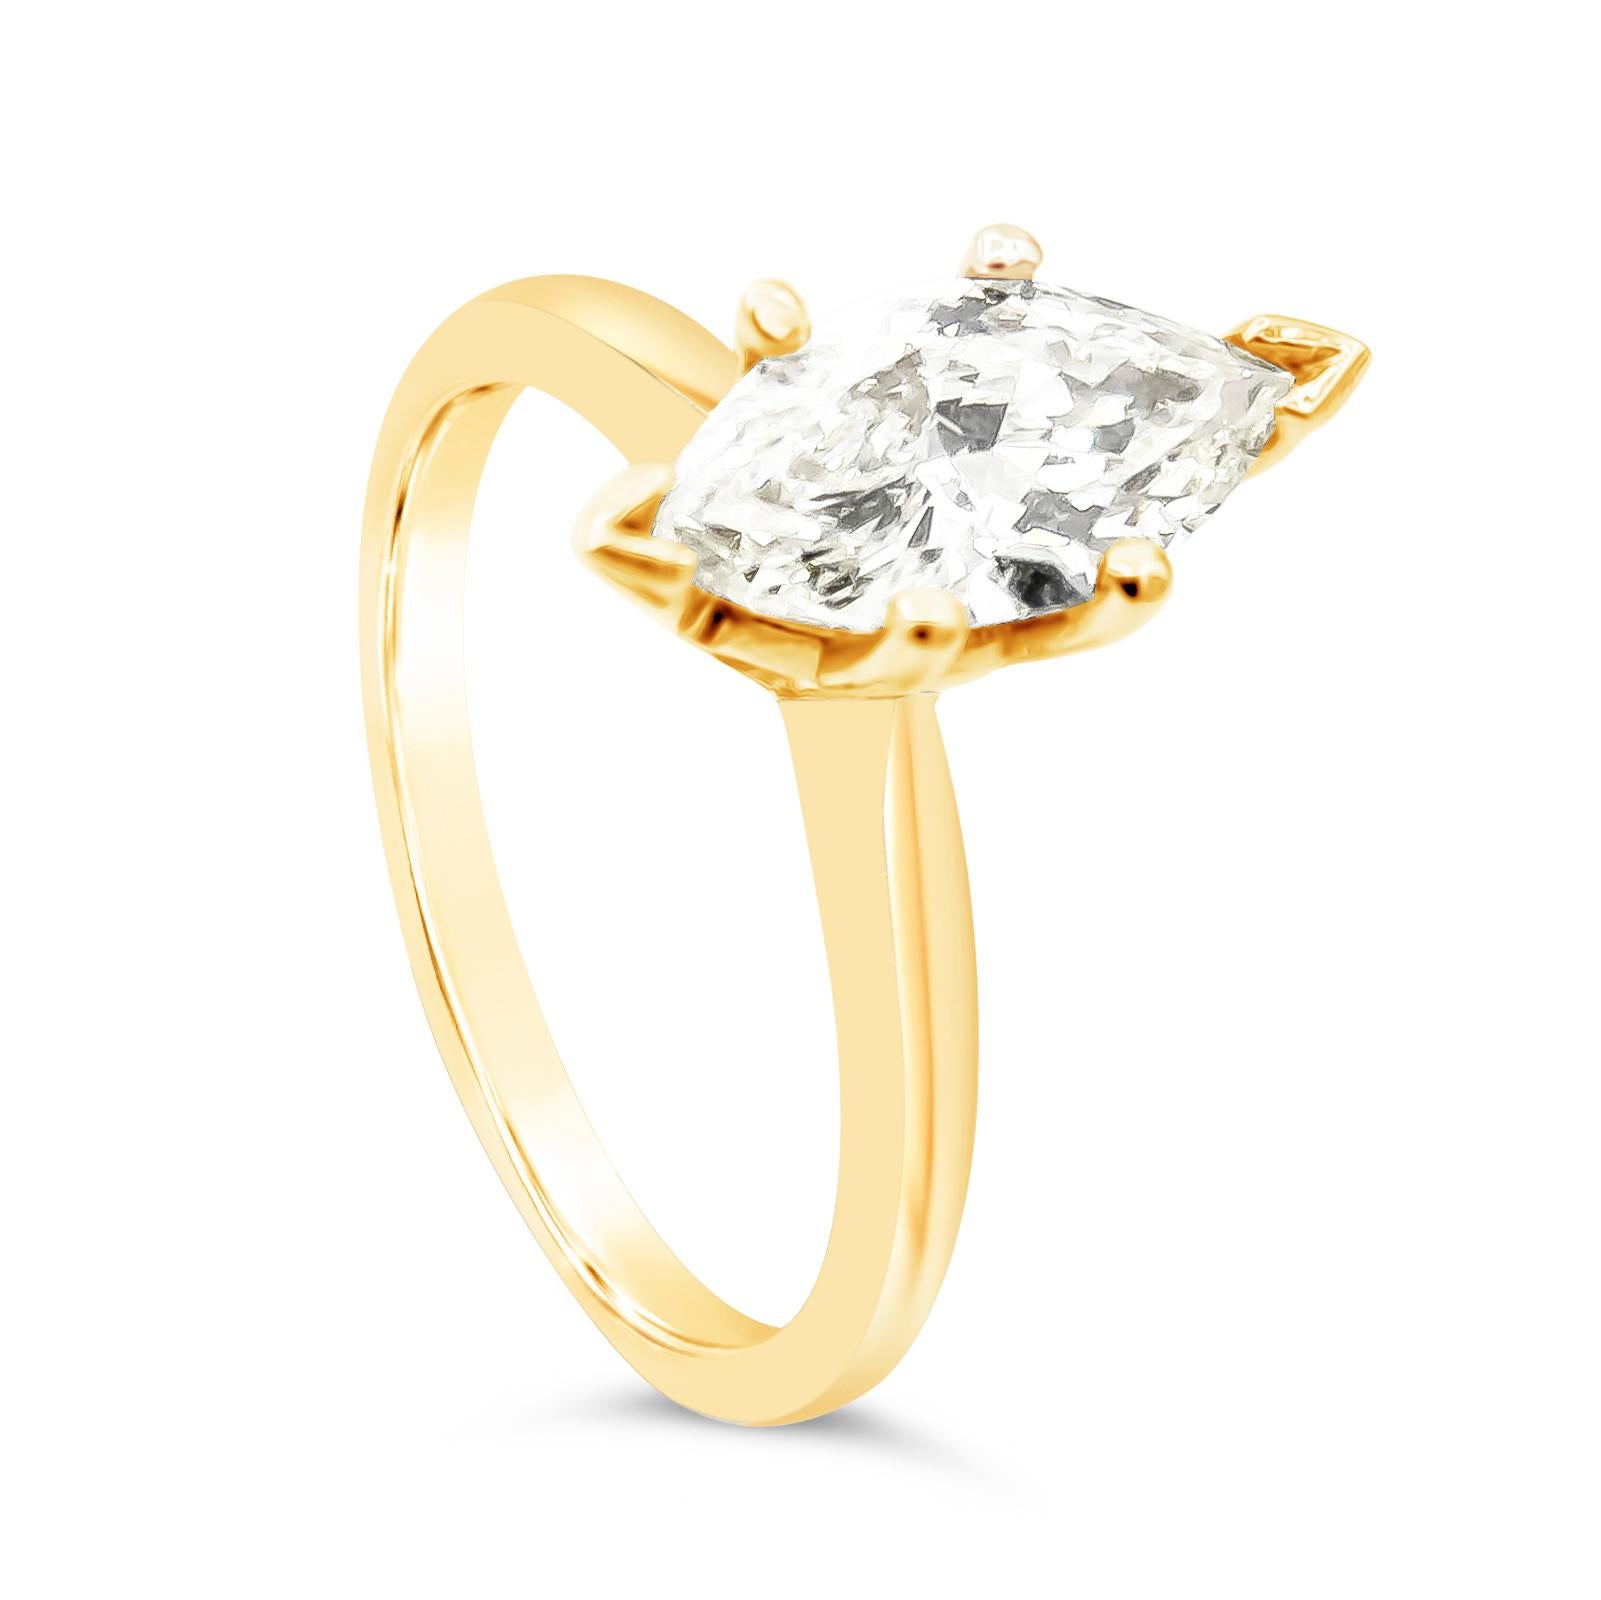 A beautiful and classy solitaire engagement ring style showcasing a marquise cut diamond weighing 1.36 carats, set in a timeless six prong basket setting and Finely Made in 18K Yellow Gold. Size 6 US resizable upon request.

Style available in